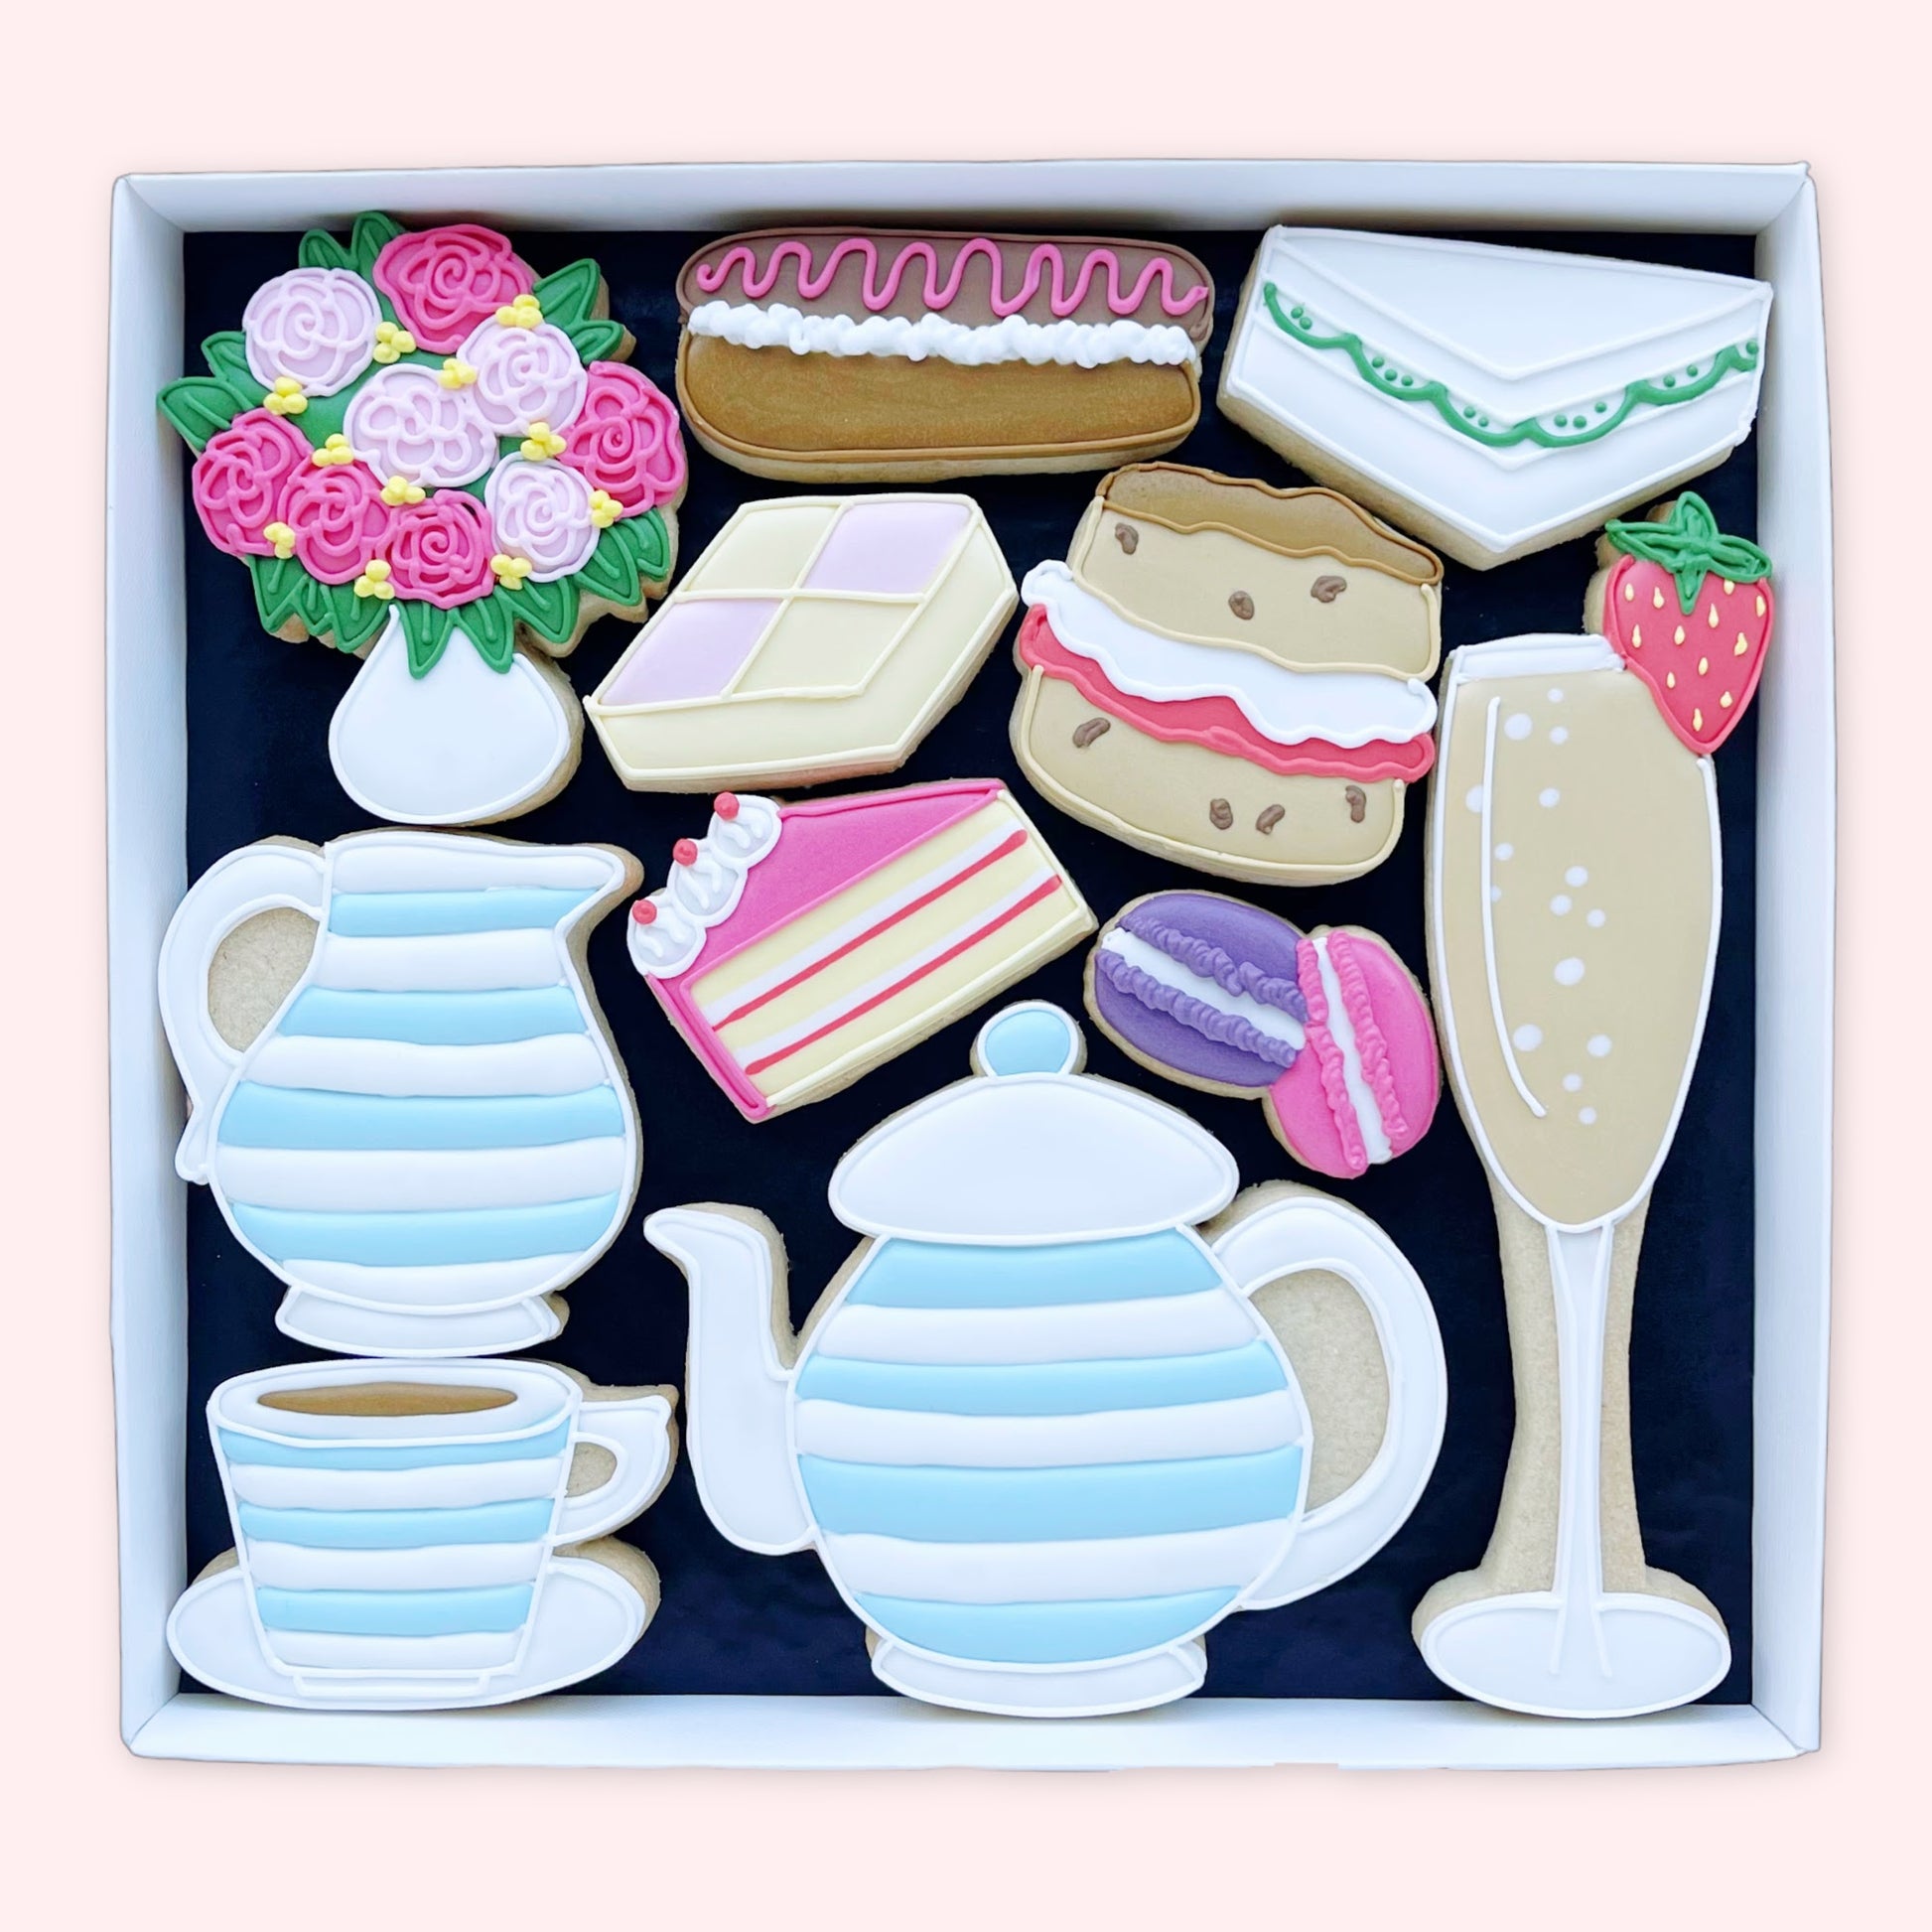 Hand iced Afternoon tea themed hand iced biscuits by Katie's biscuit shop in an open white gift box 